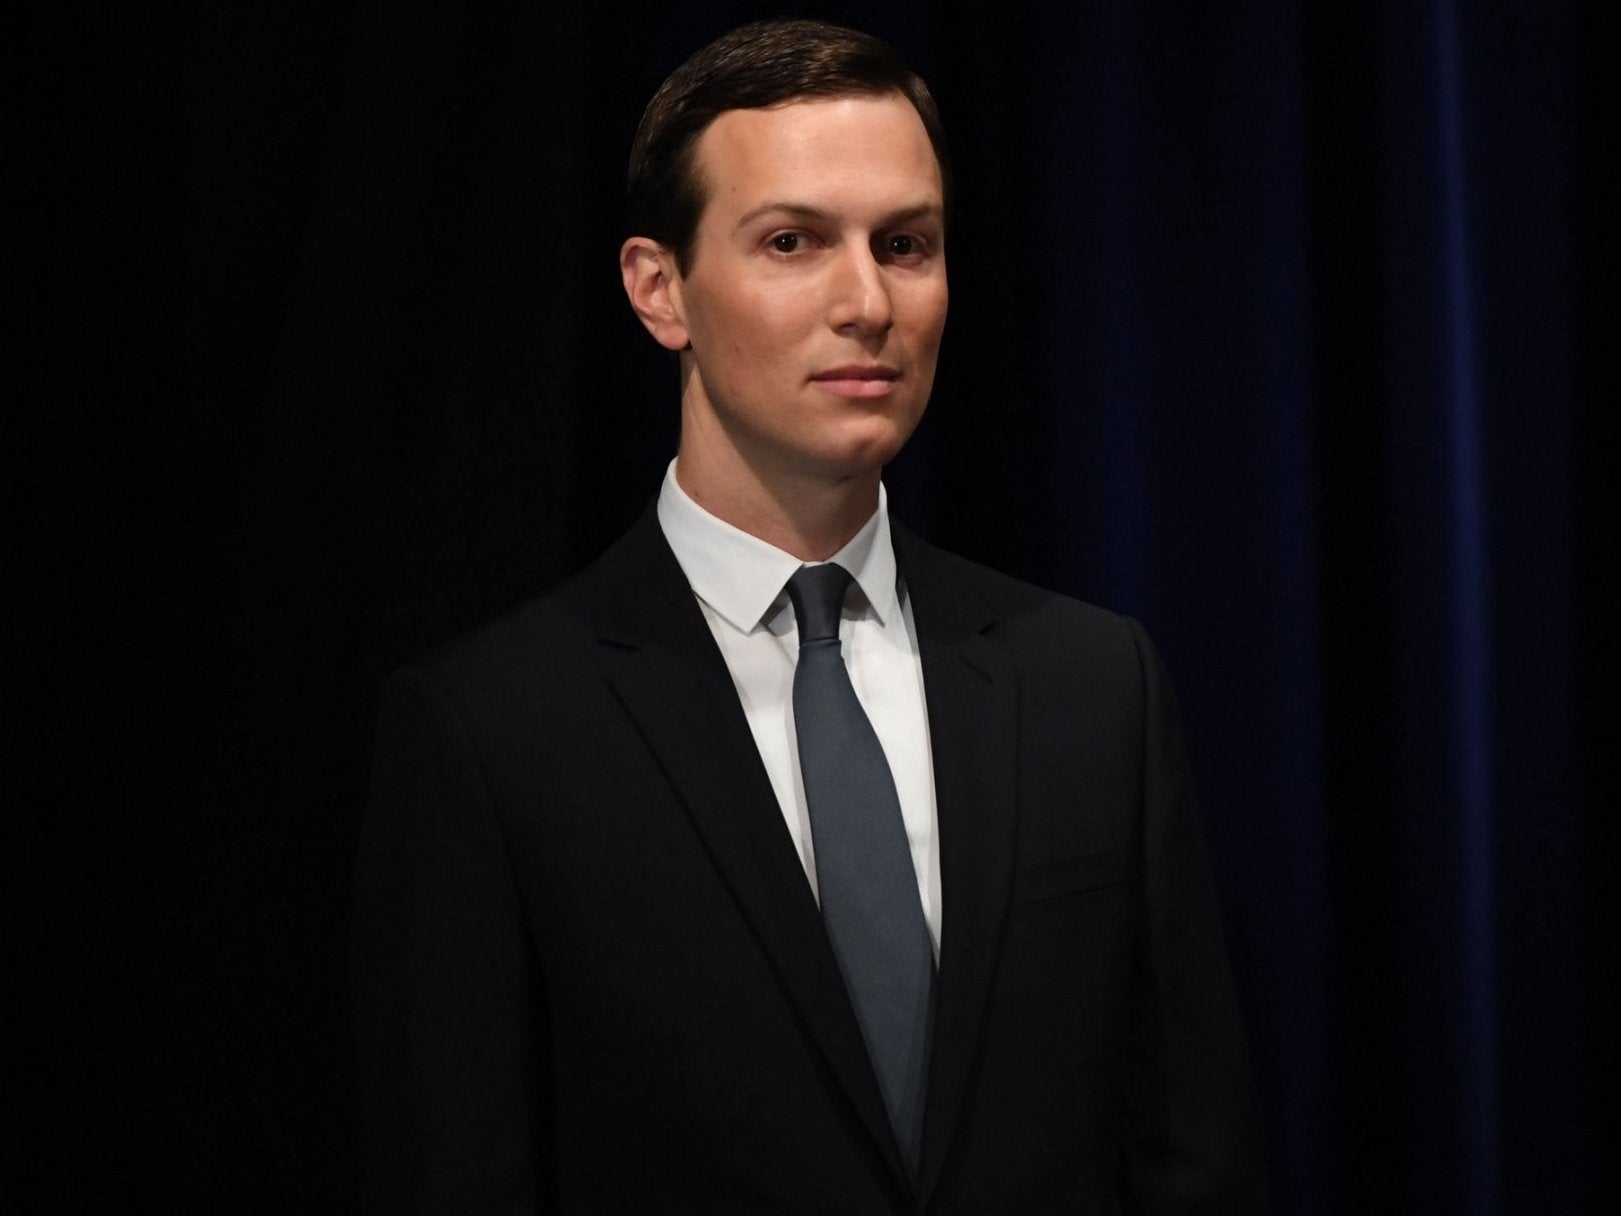 Donald Trump's son-in-law Jared Kushner has become an ally of Saudi Arabia.